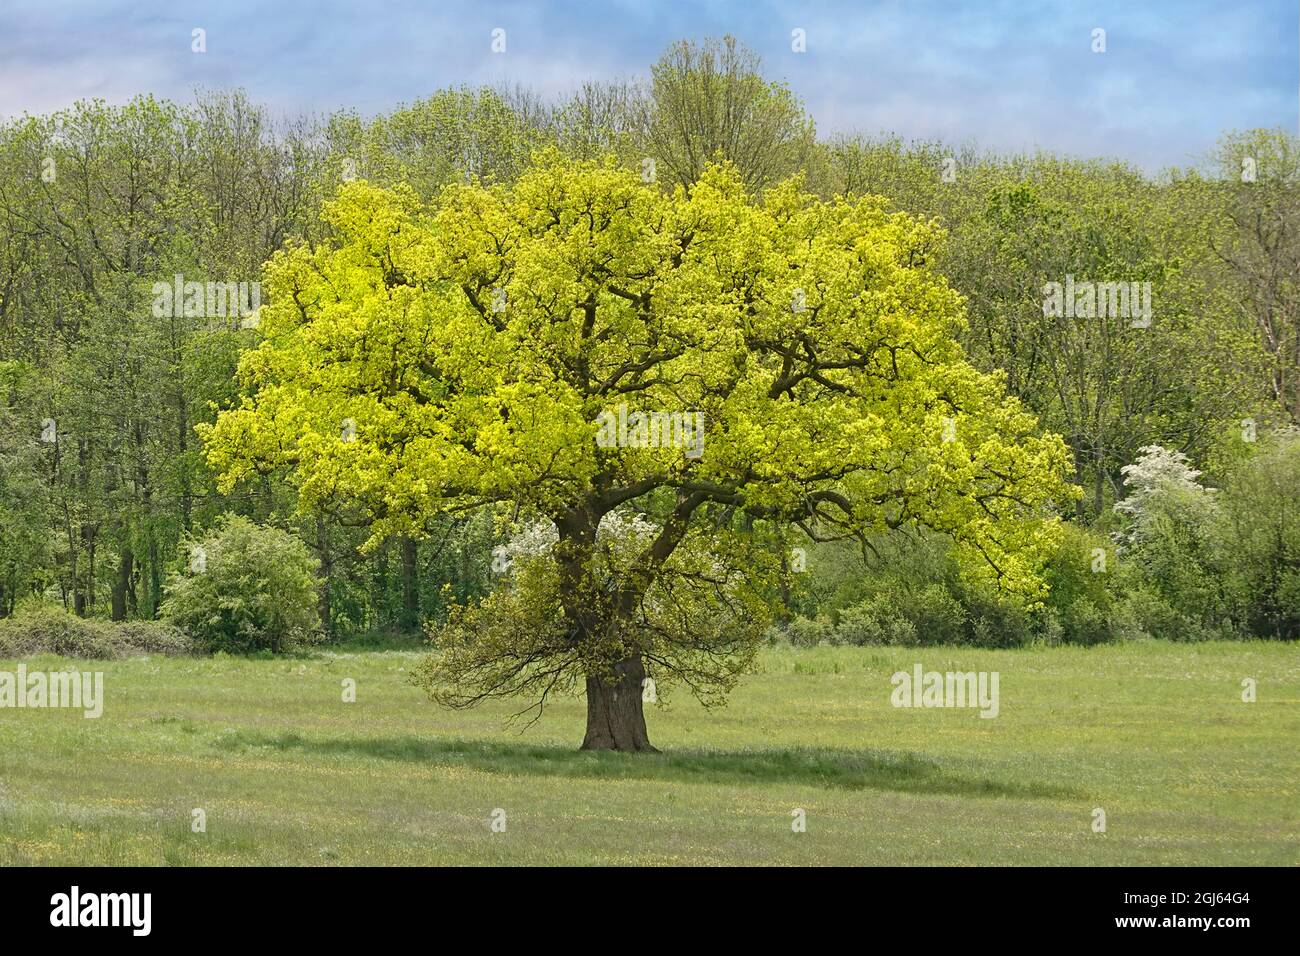 Spring leaf growth on freestanding isolated English oak tree in grass field in front of a mixed springtime woodland landscape backdrop in England UK Stock Photo